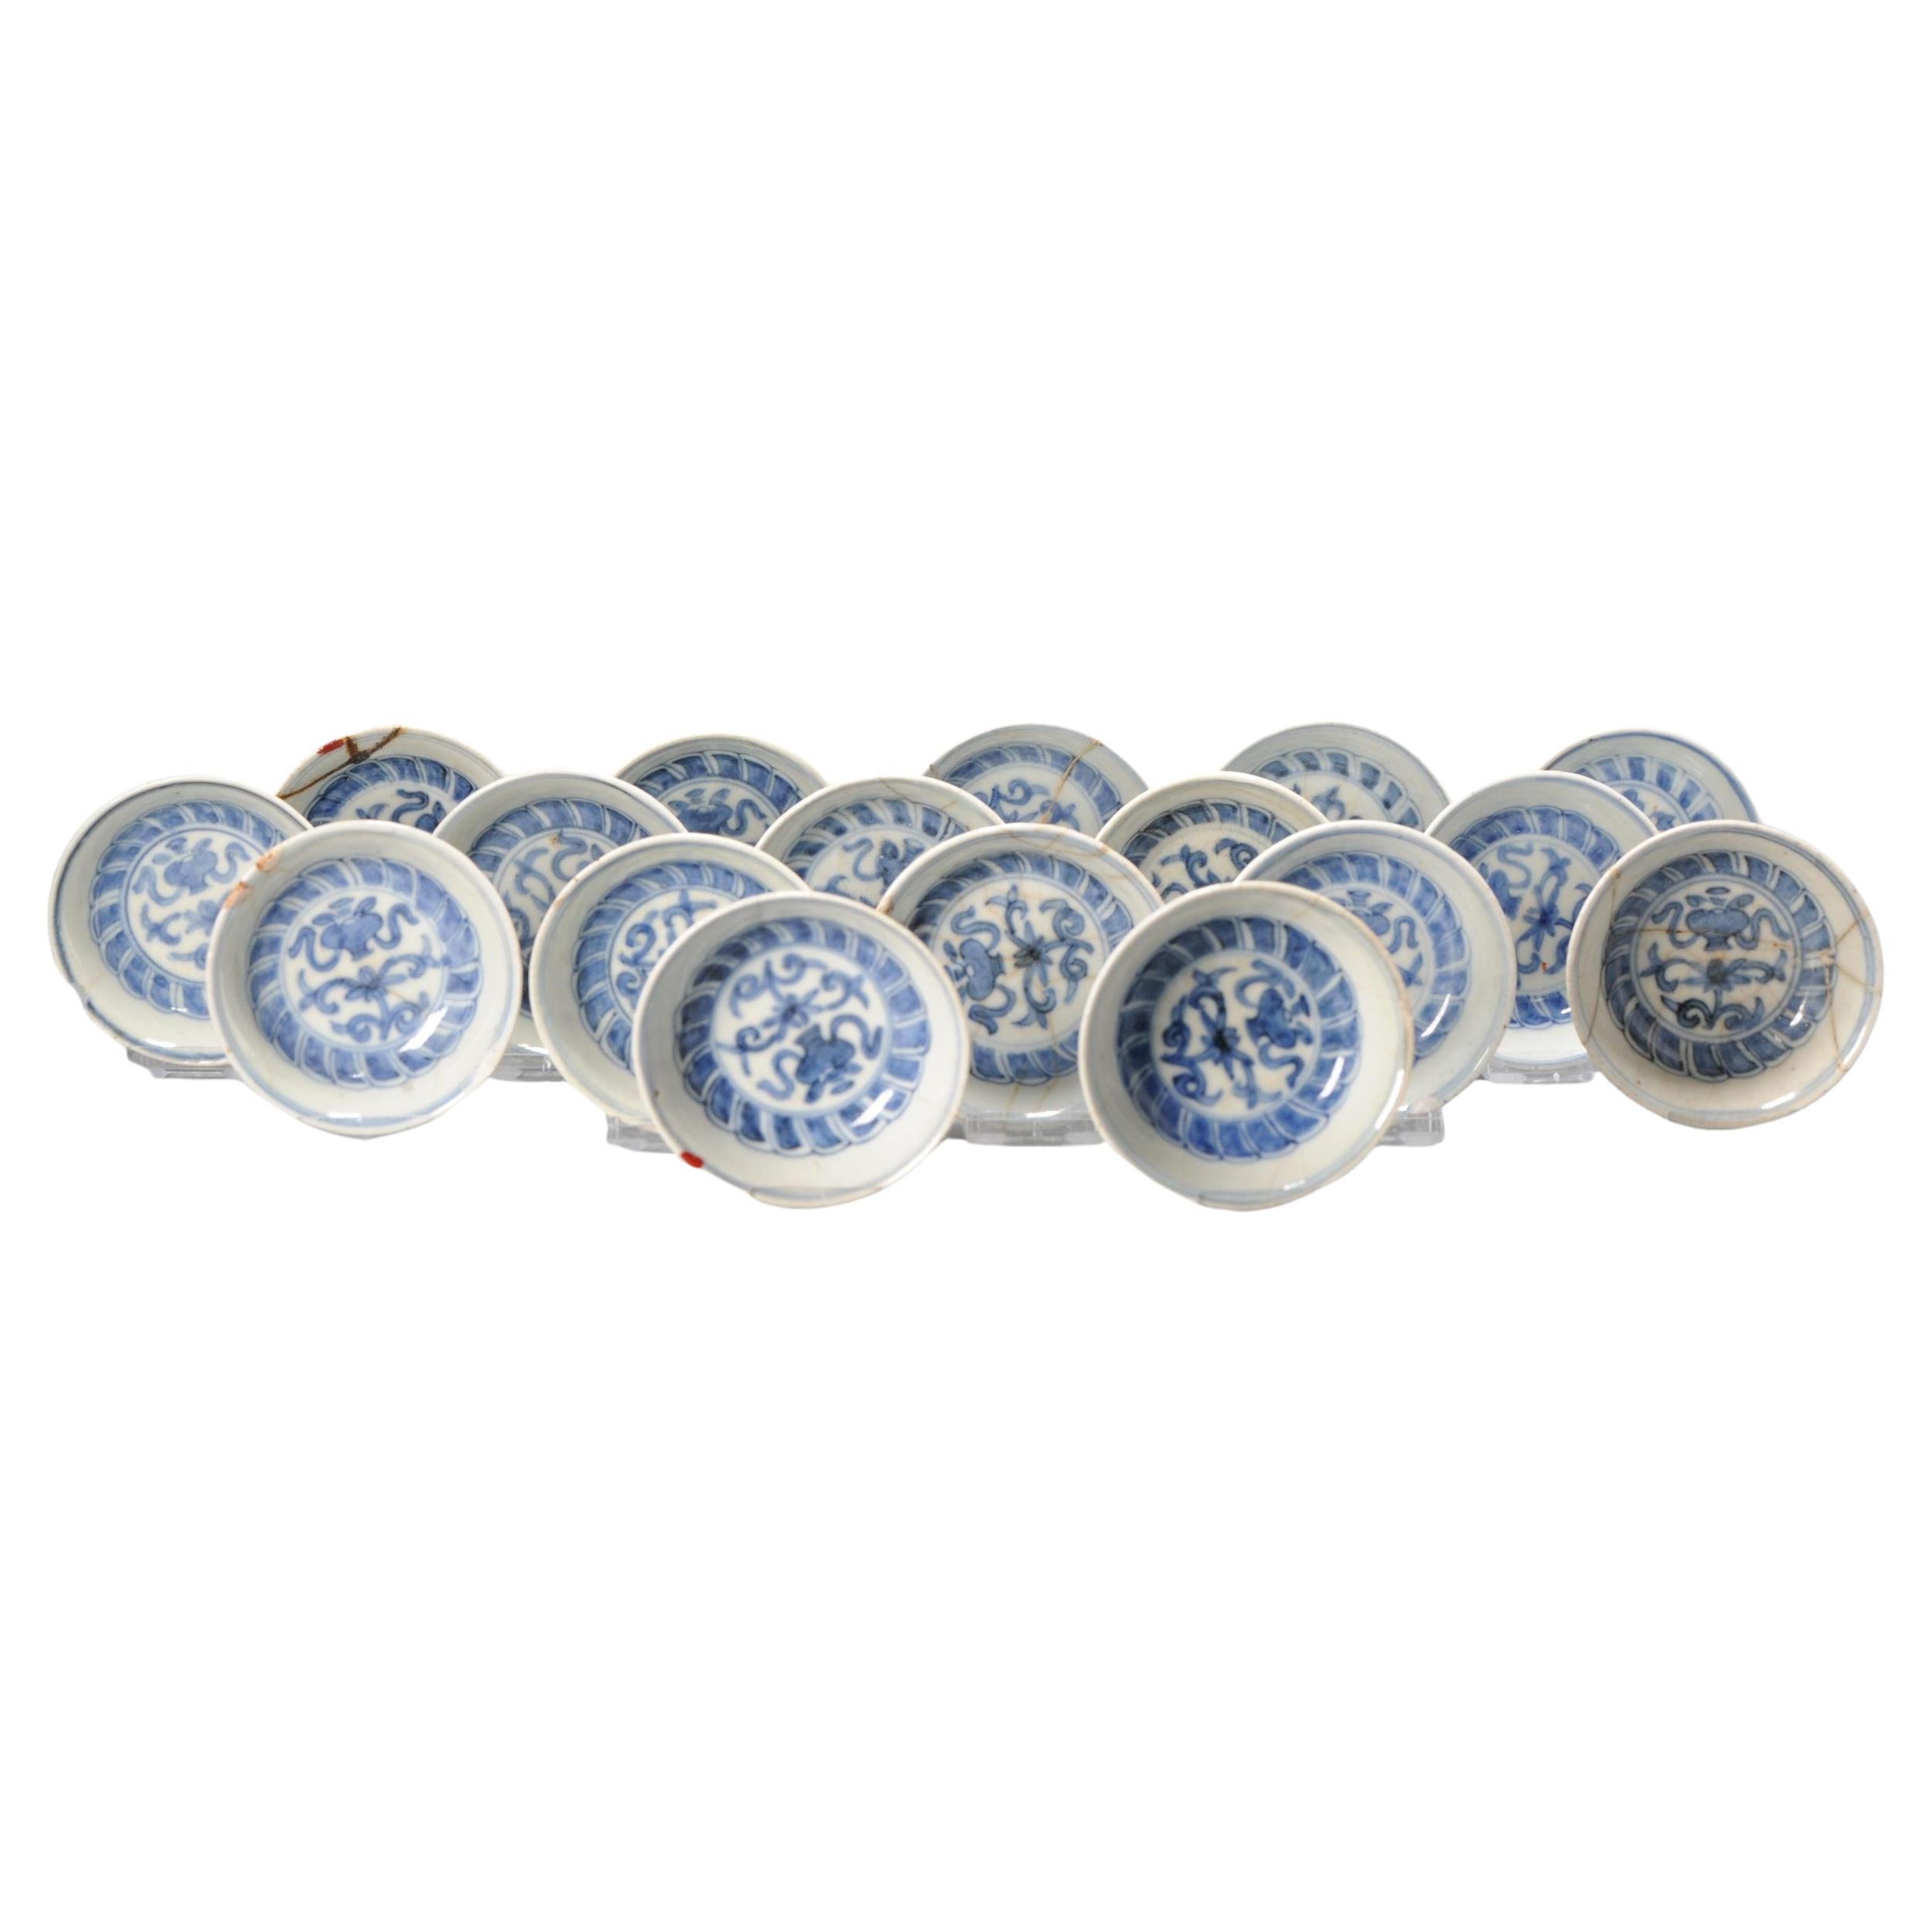 Set of 17 Large Antique Kosometsuke Chinese Ming Dynasty Plates, 17th Century For Sale